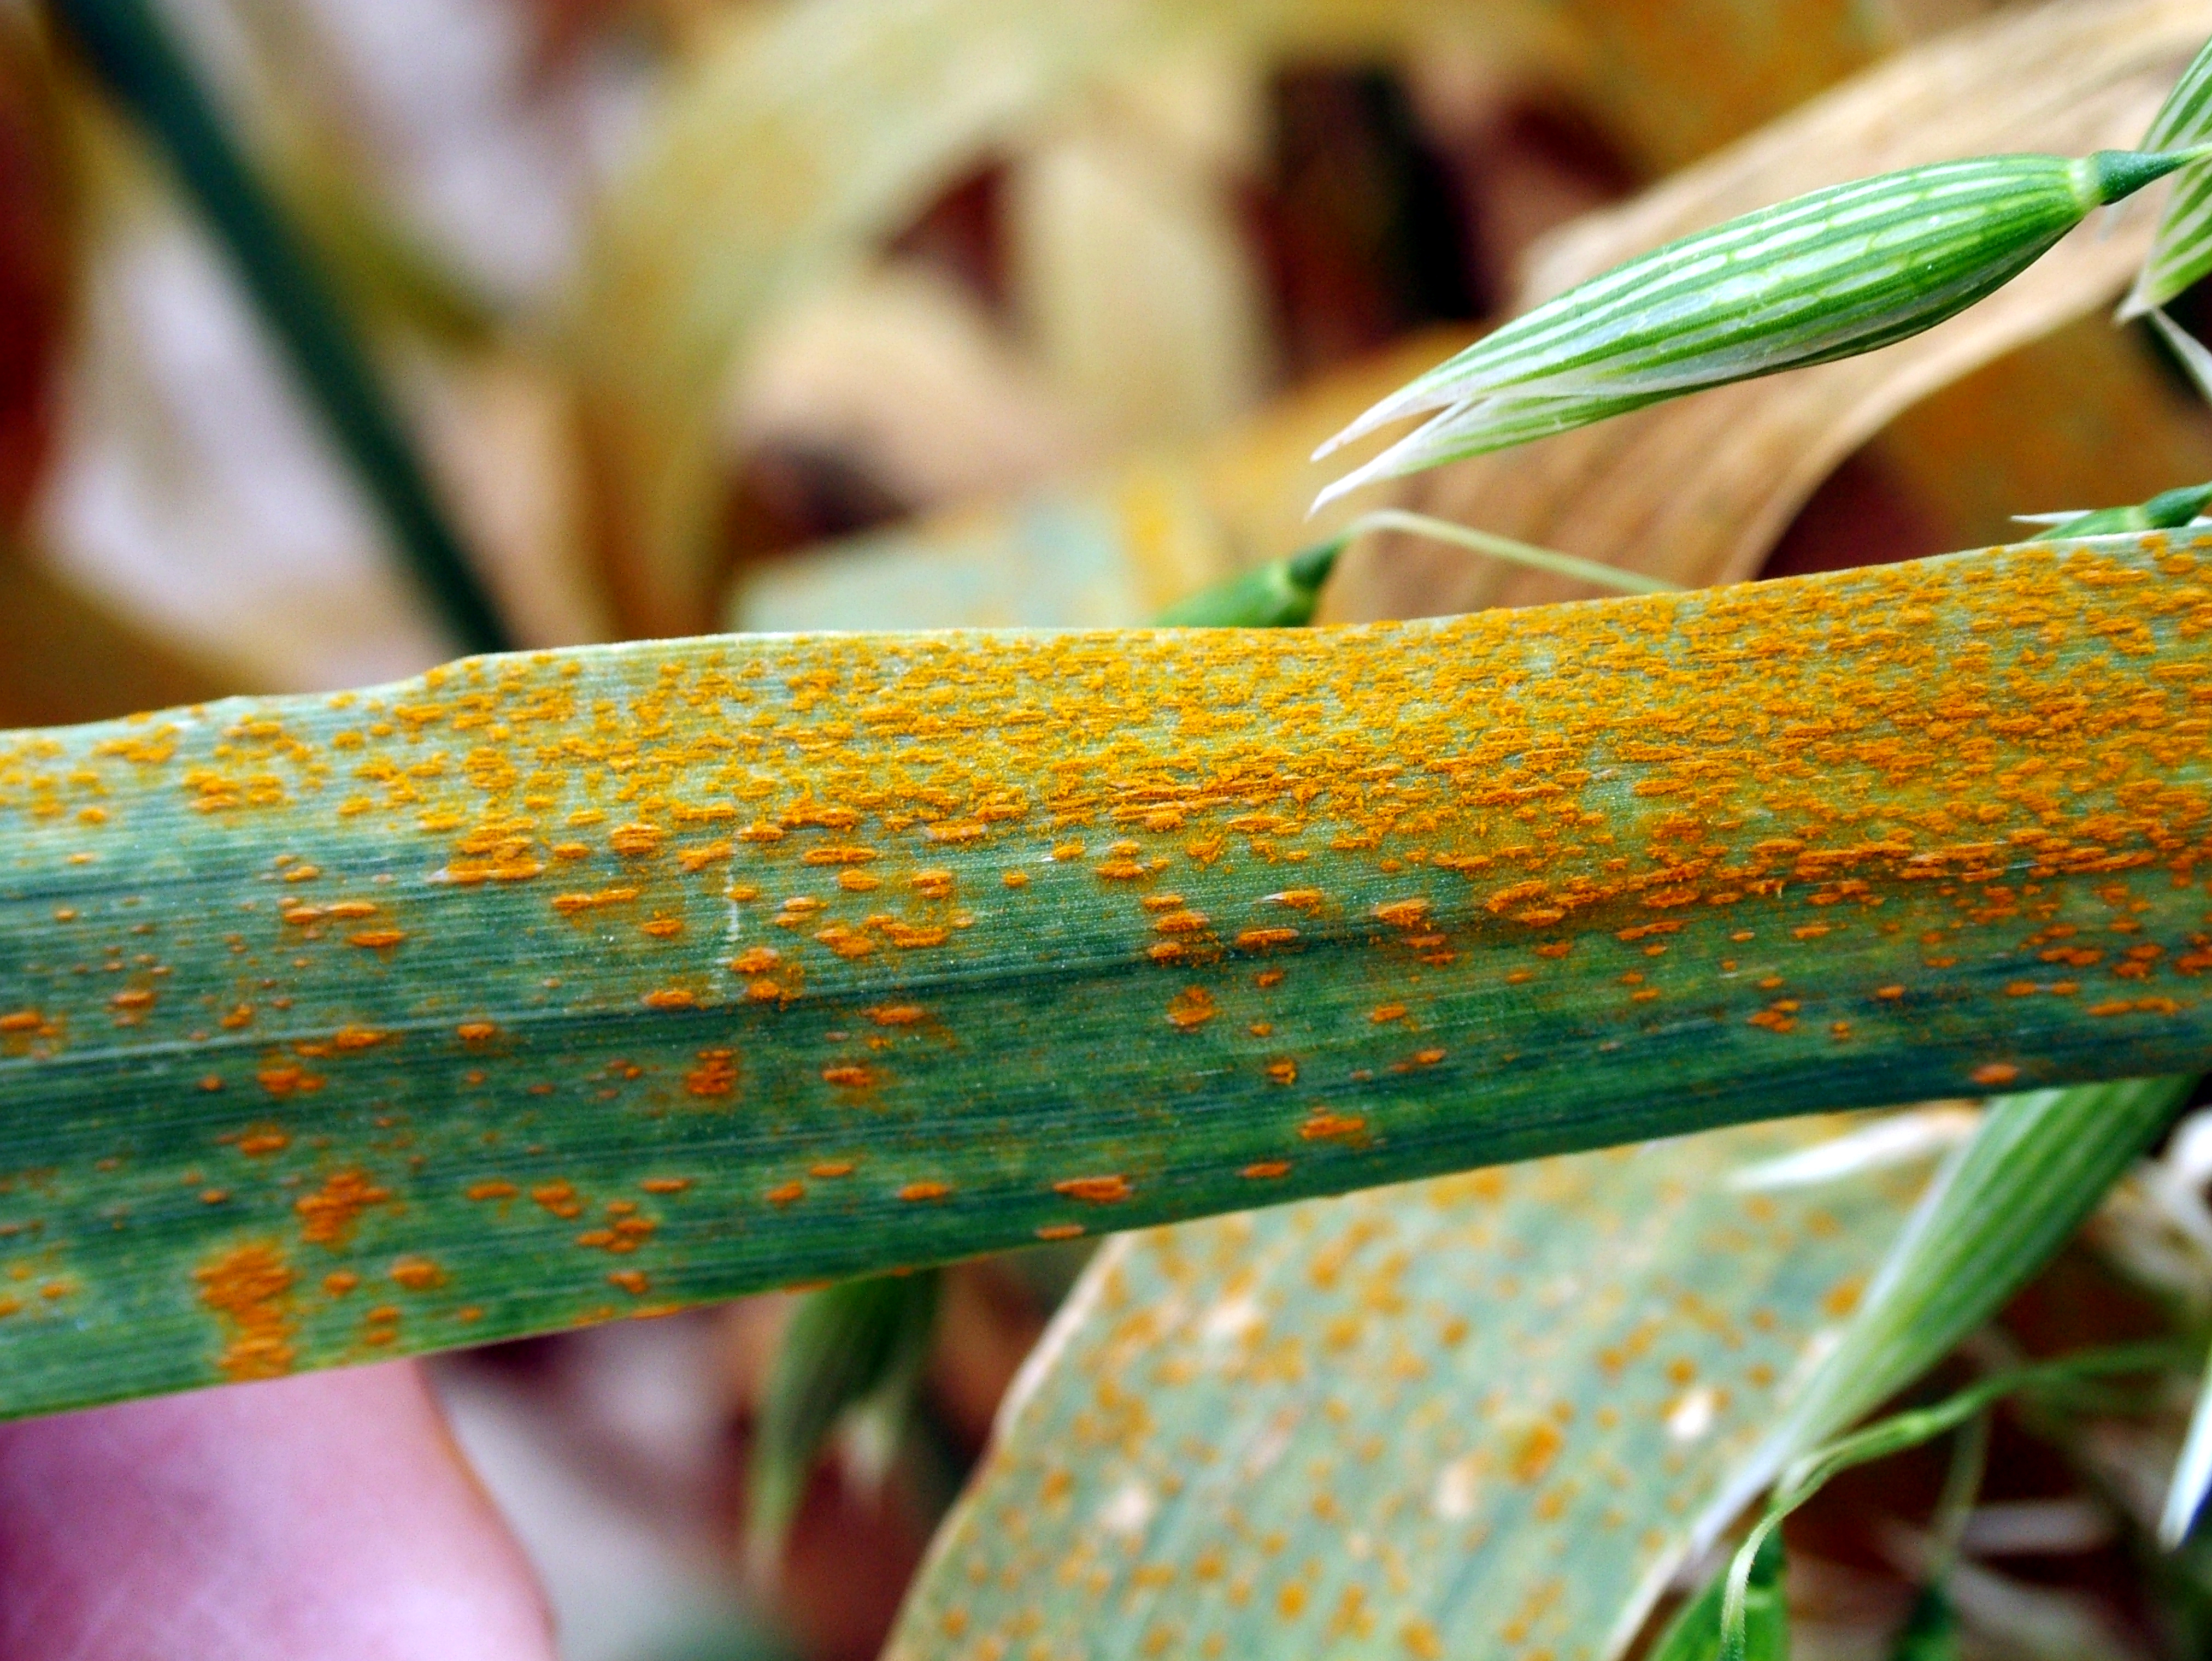 Crown rust damage on oat leaves. Details in text following the image.